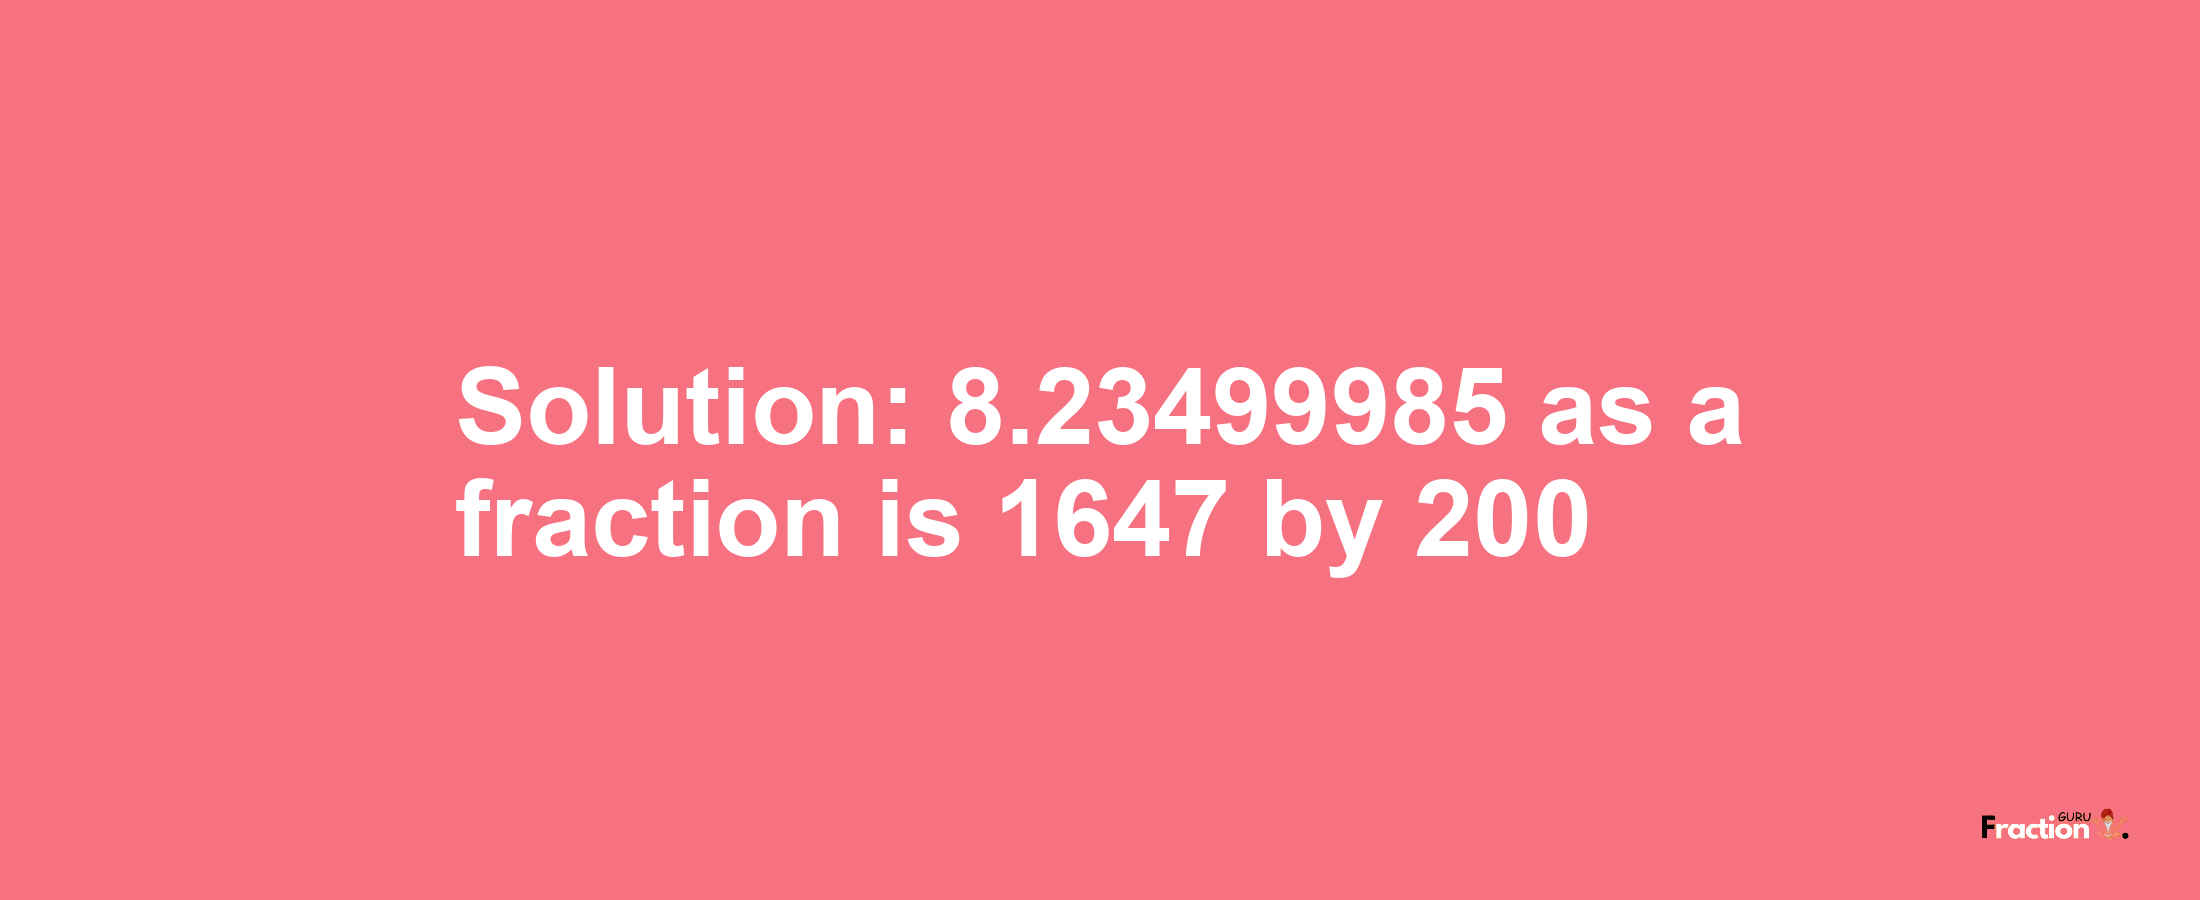 Solution:8.23499985 as a fraction is 1647/200